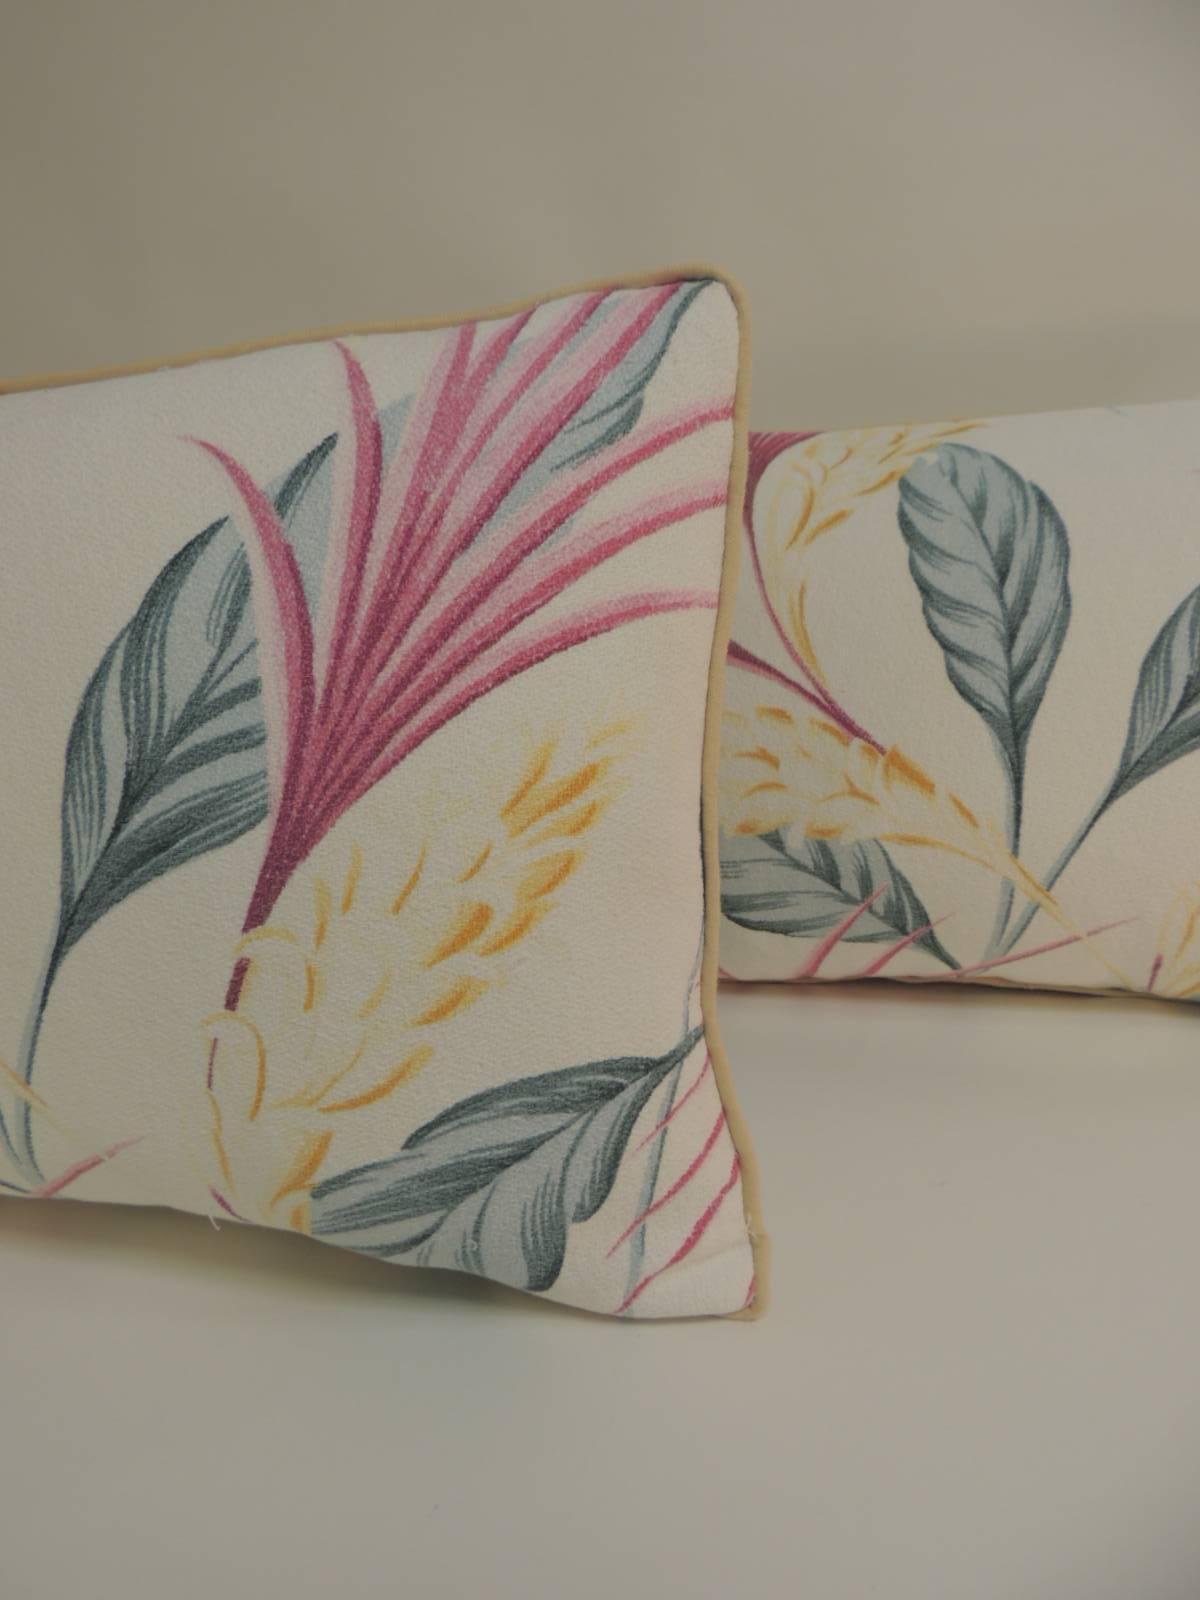 Pair of Vintage Florida barkcloth decorative Lumbar pillows with soft yellow linen welt and backings. 
In shades of pink, fuchsia, yellow, green and natural. Decorative pillows handcrafted and designed in the USA. 
Custom-made pillow inserts. Hand